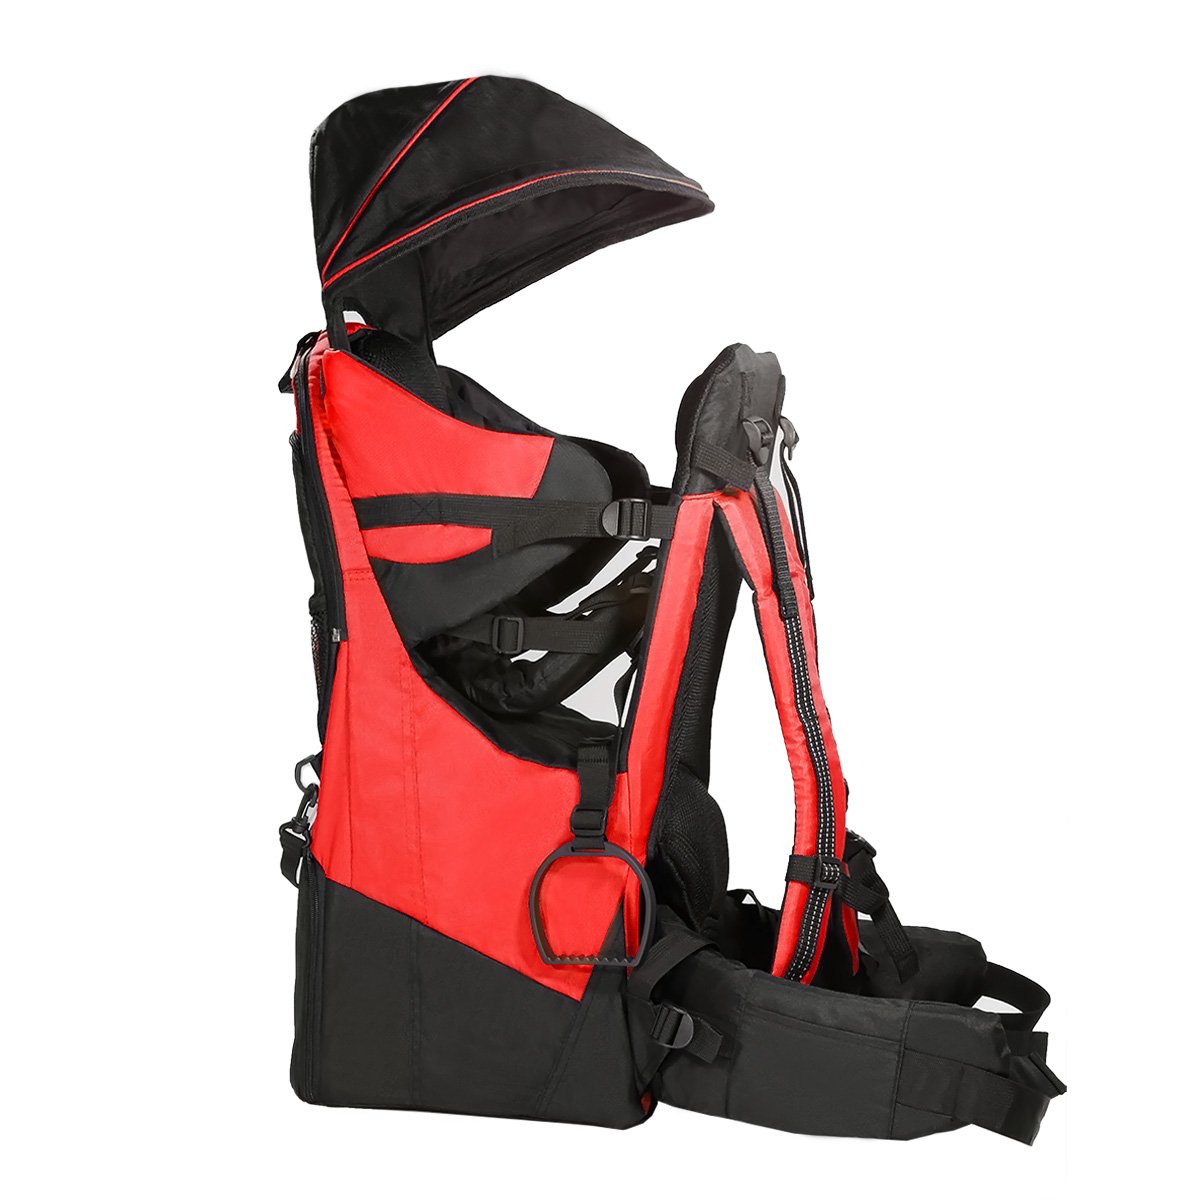 Acplaypen.com Baby Backpack Hiking Toddler Child Carrier Lightweight with Stand & Sun Shade Visor, Red baby hiking carrier oem odm factory manufacturer